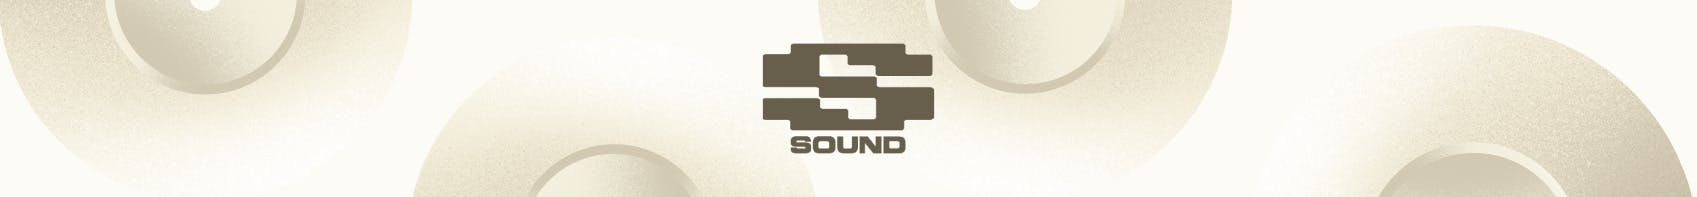 Thank you to our sponsor Sound